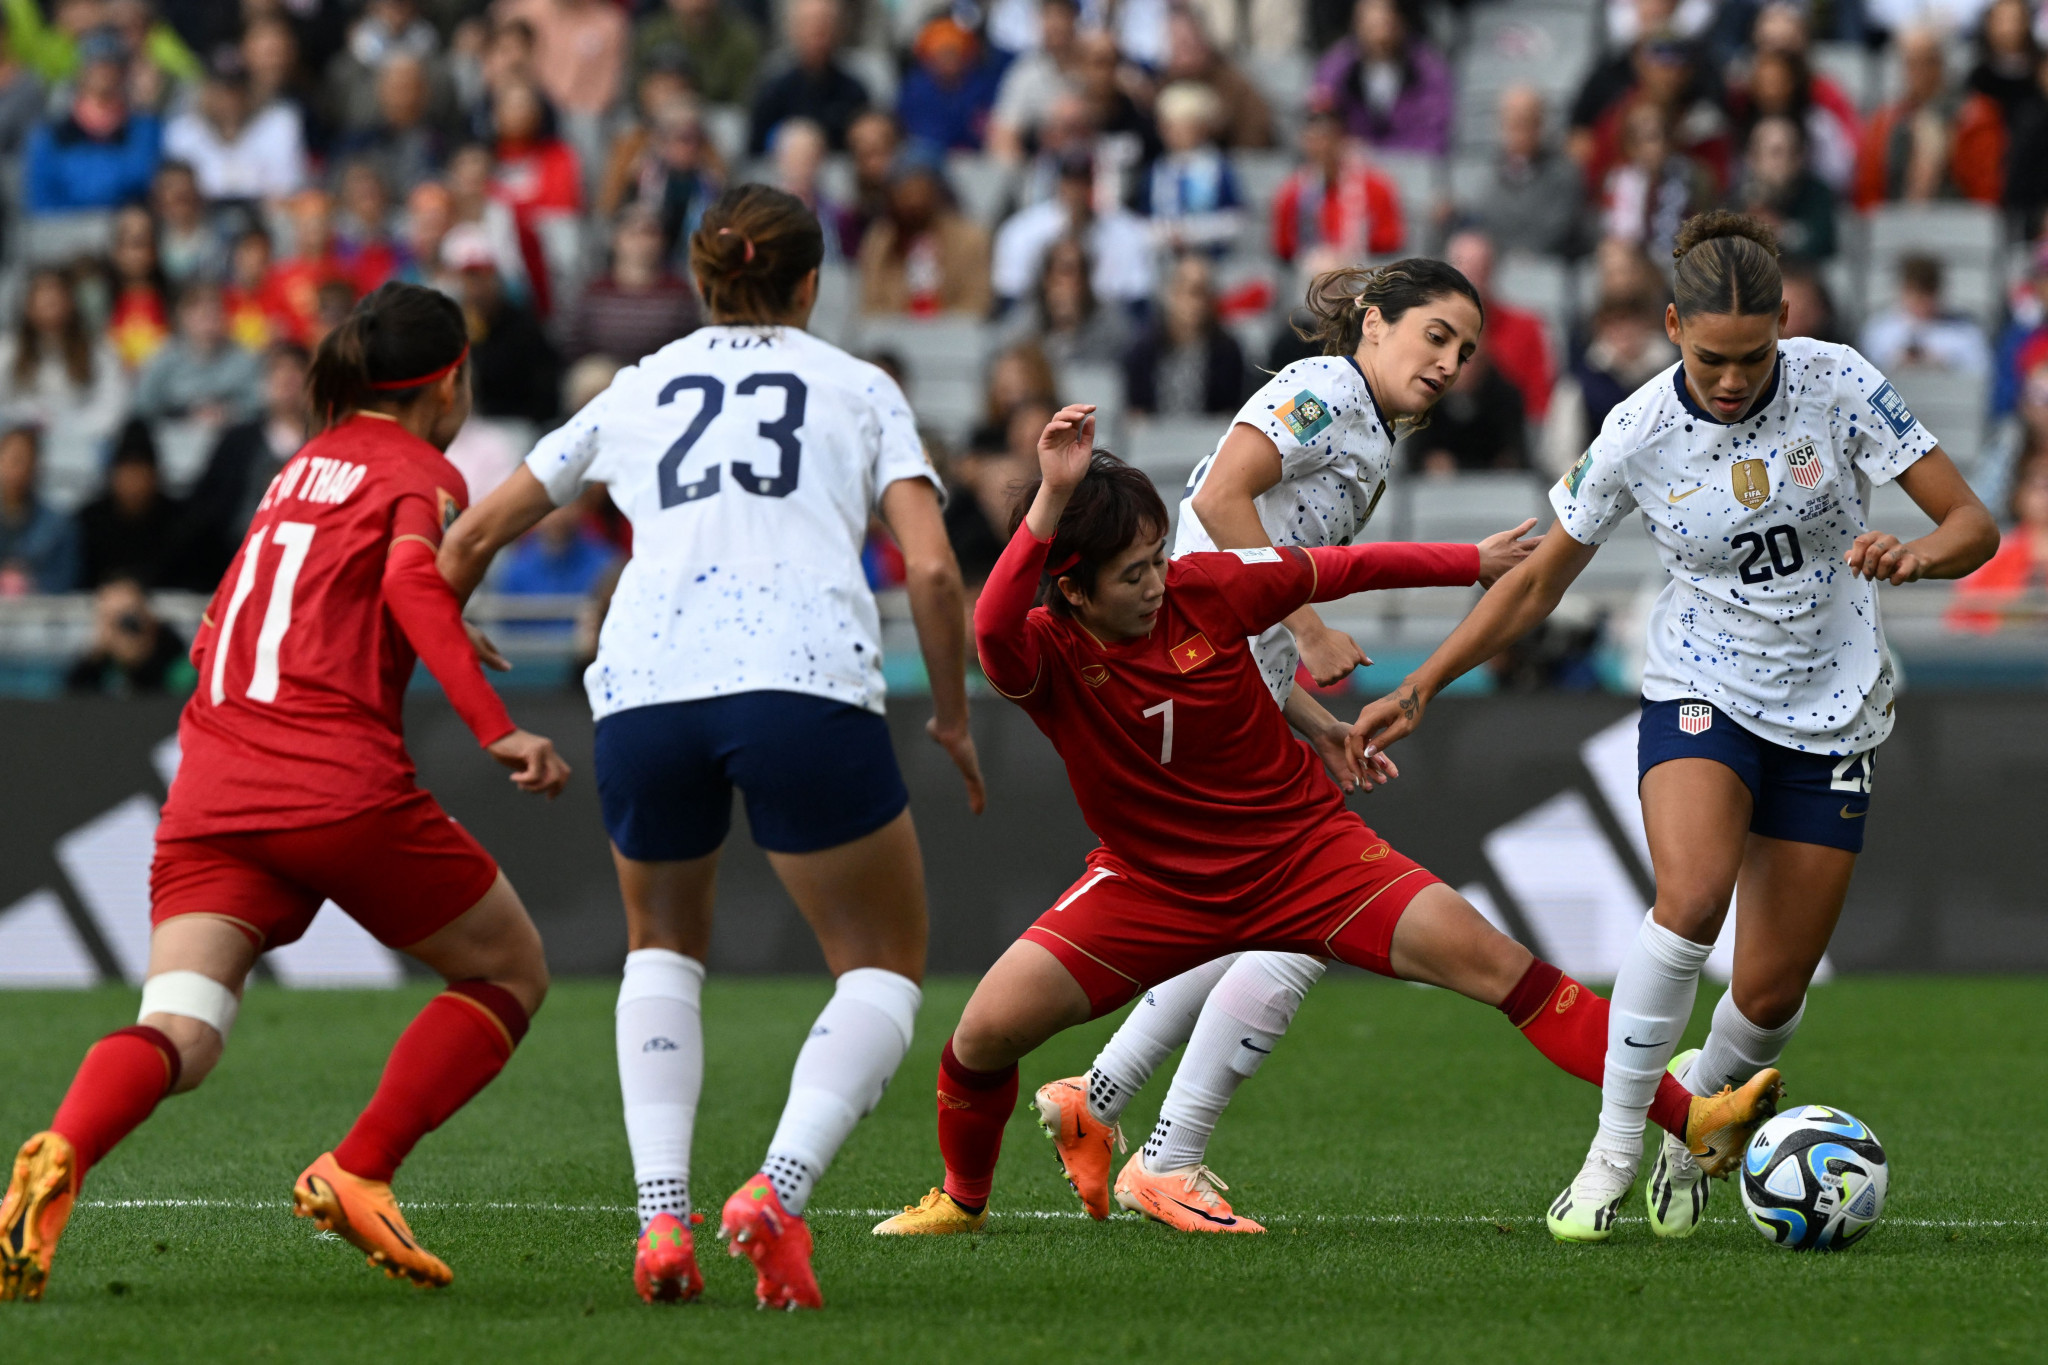 Back-to-back winners the US watched by more than 6.2 million in FIFA Women's World Cup opener